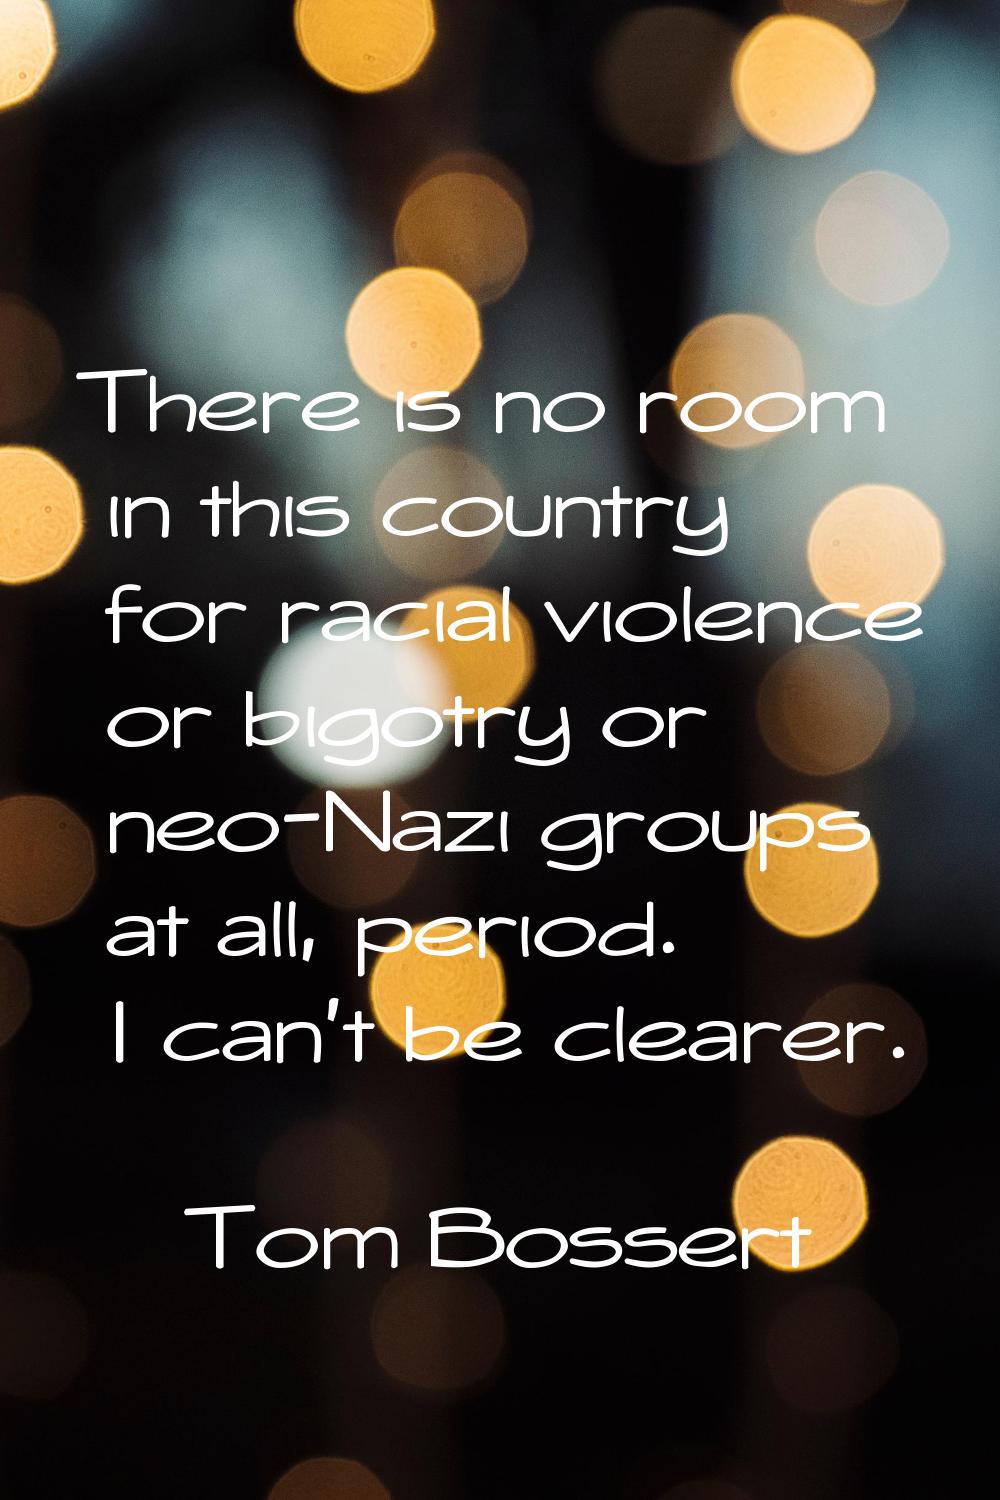 There is no room in this country for racial violence or bigotry or neo-Nazi groups at all, period. 